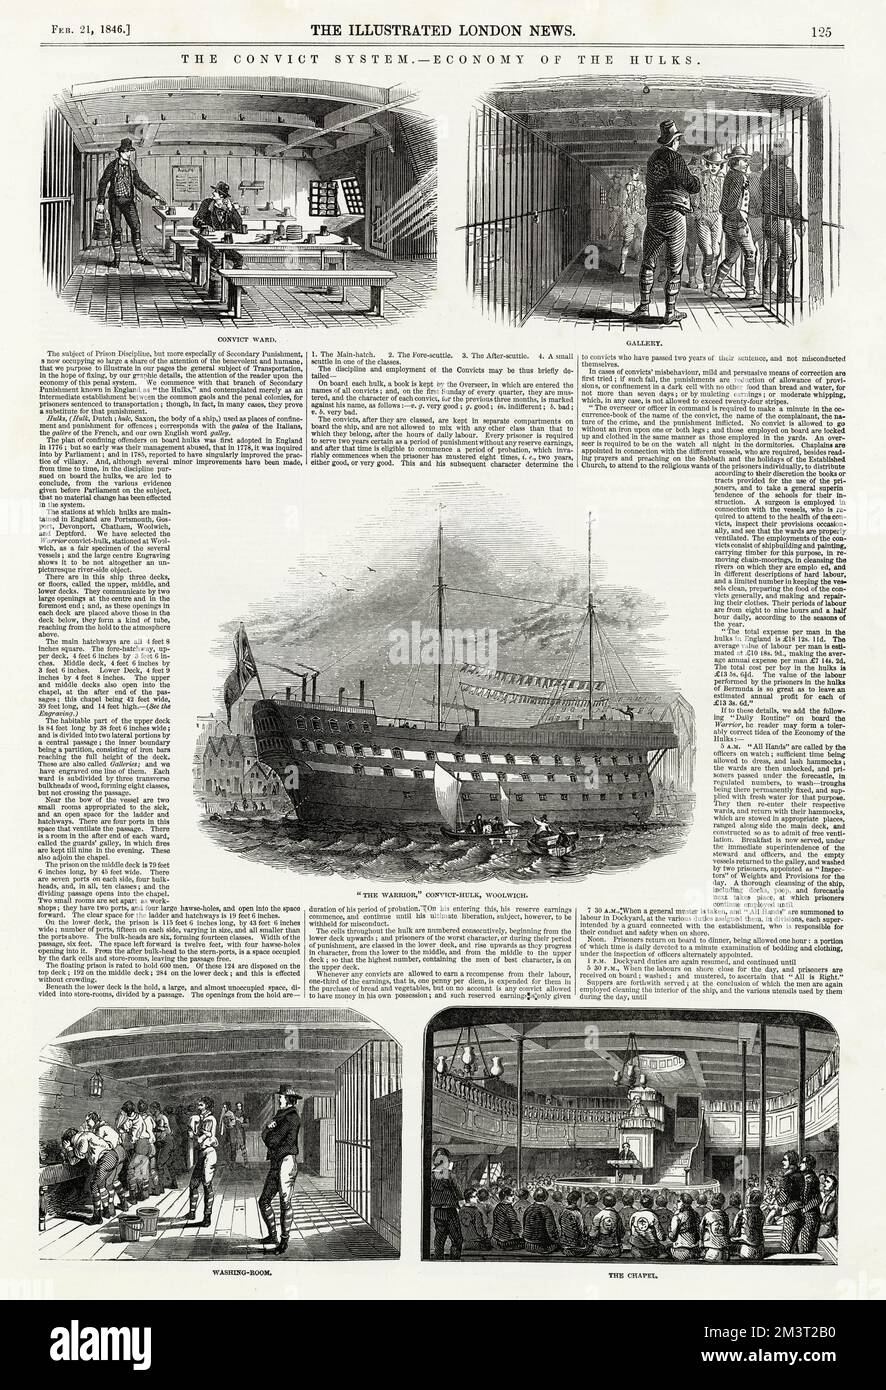 Page from The Illustrated London News reporting on the convict hulk, Warrior, docked at Woolwich. Illustrations show the ship's exterior as well as various areas inside - the convict ward, chapel, gallery and washing room. Stock Photo